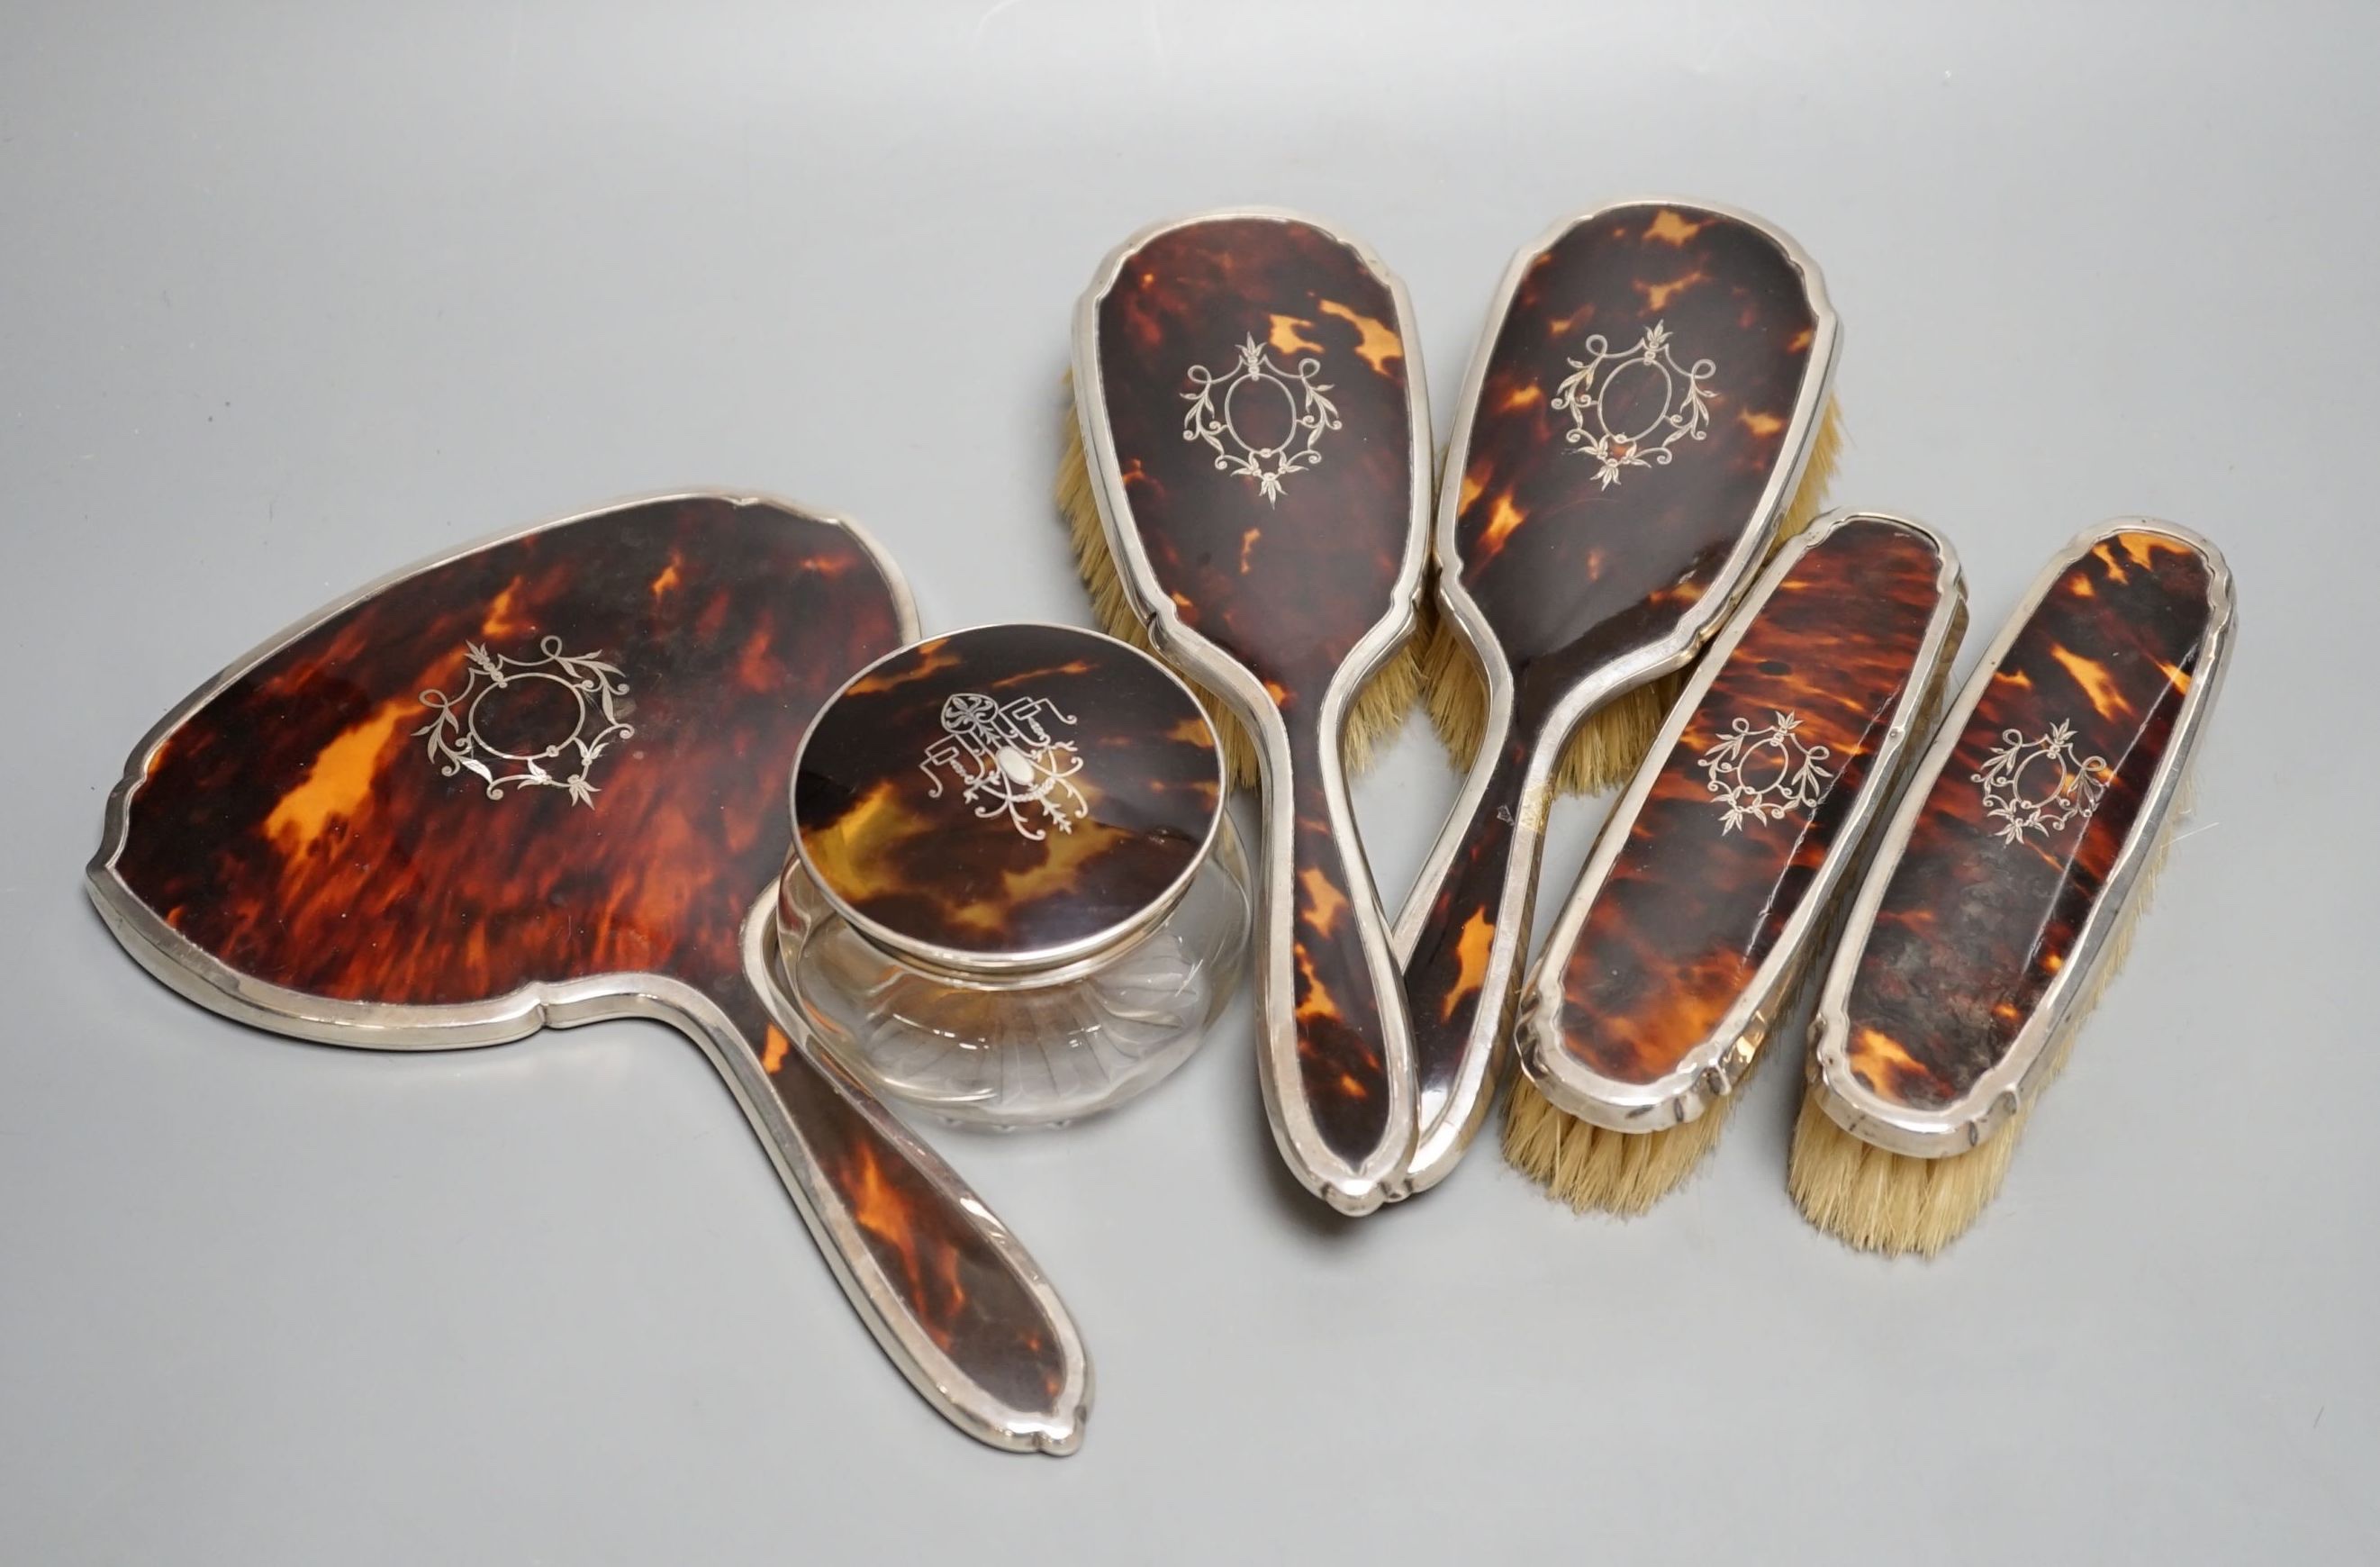 A George V silver and tortoiseshell mounted mirror and brush set, Birmingham, 1928 and a similar powder jar.